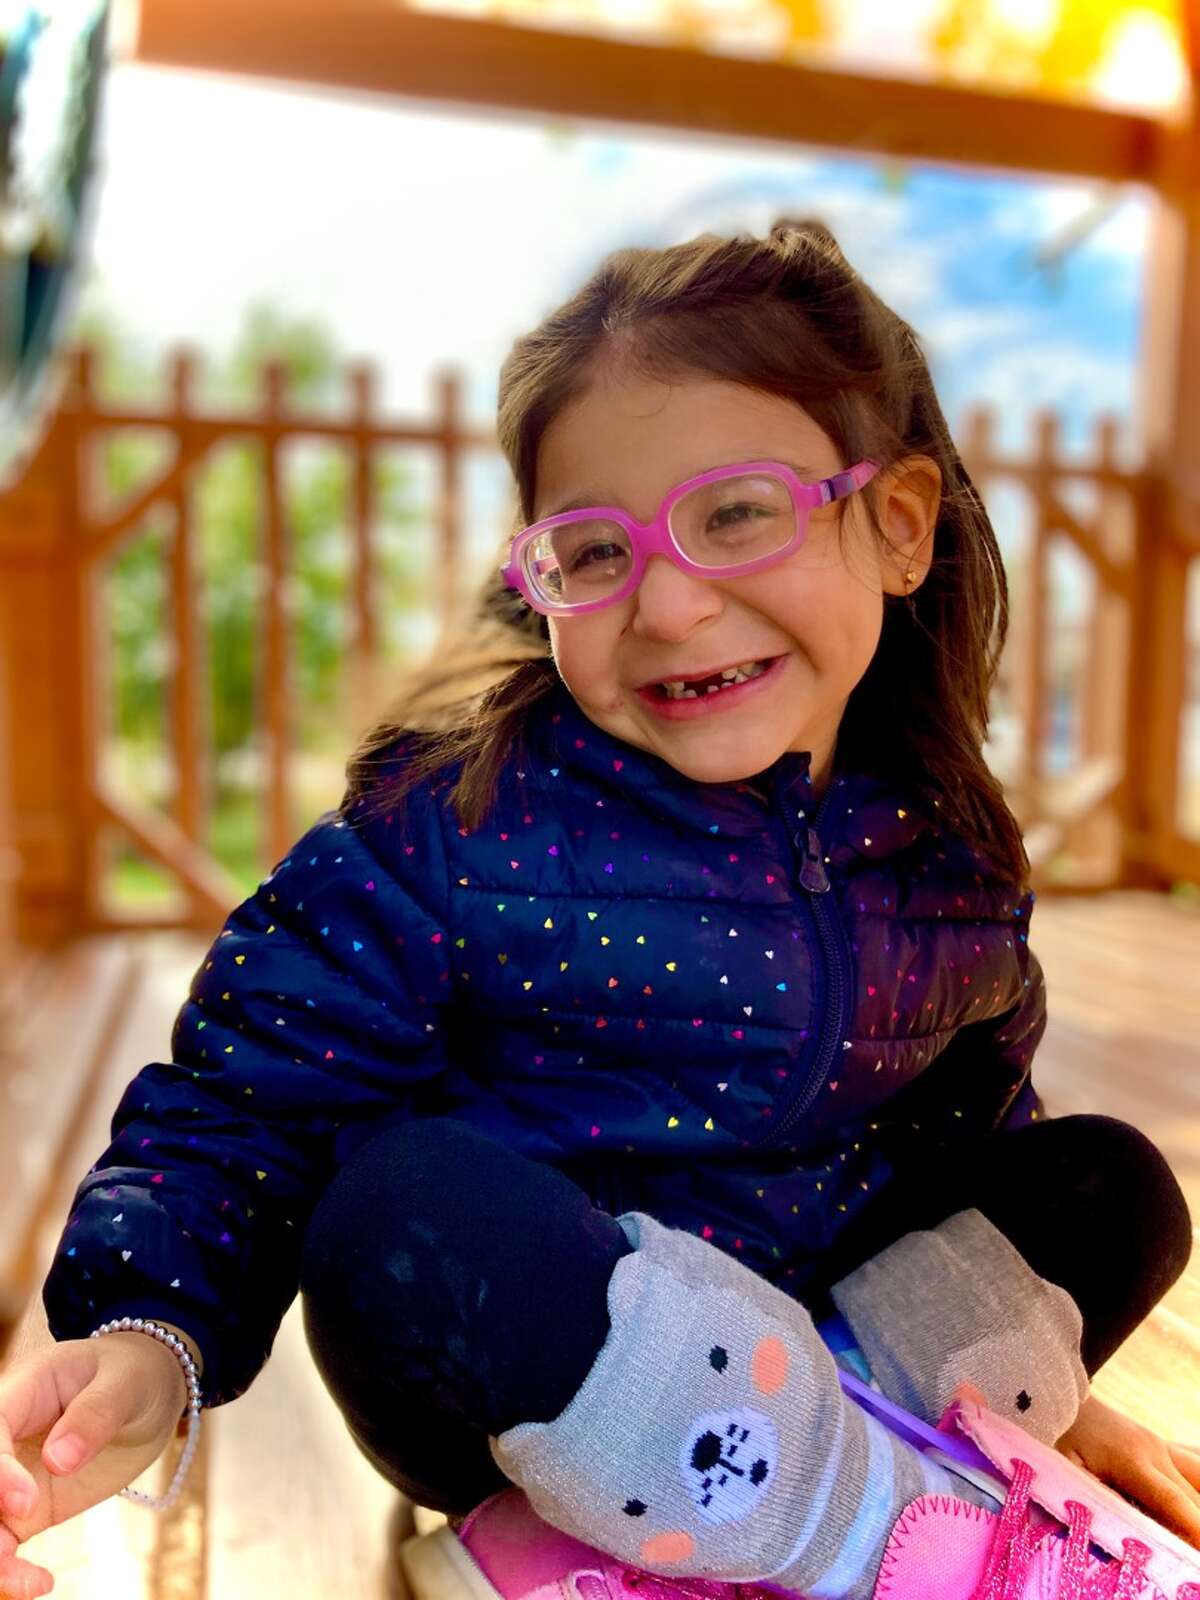 Alexis Rodriguez, 4, and her family will light up Market Street and its 70-foot Christmas tree as part of the “Market Street in Lights” holiday spectacular set in Market Street’s Central Park at 6 p.m. Nov. 17. 